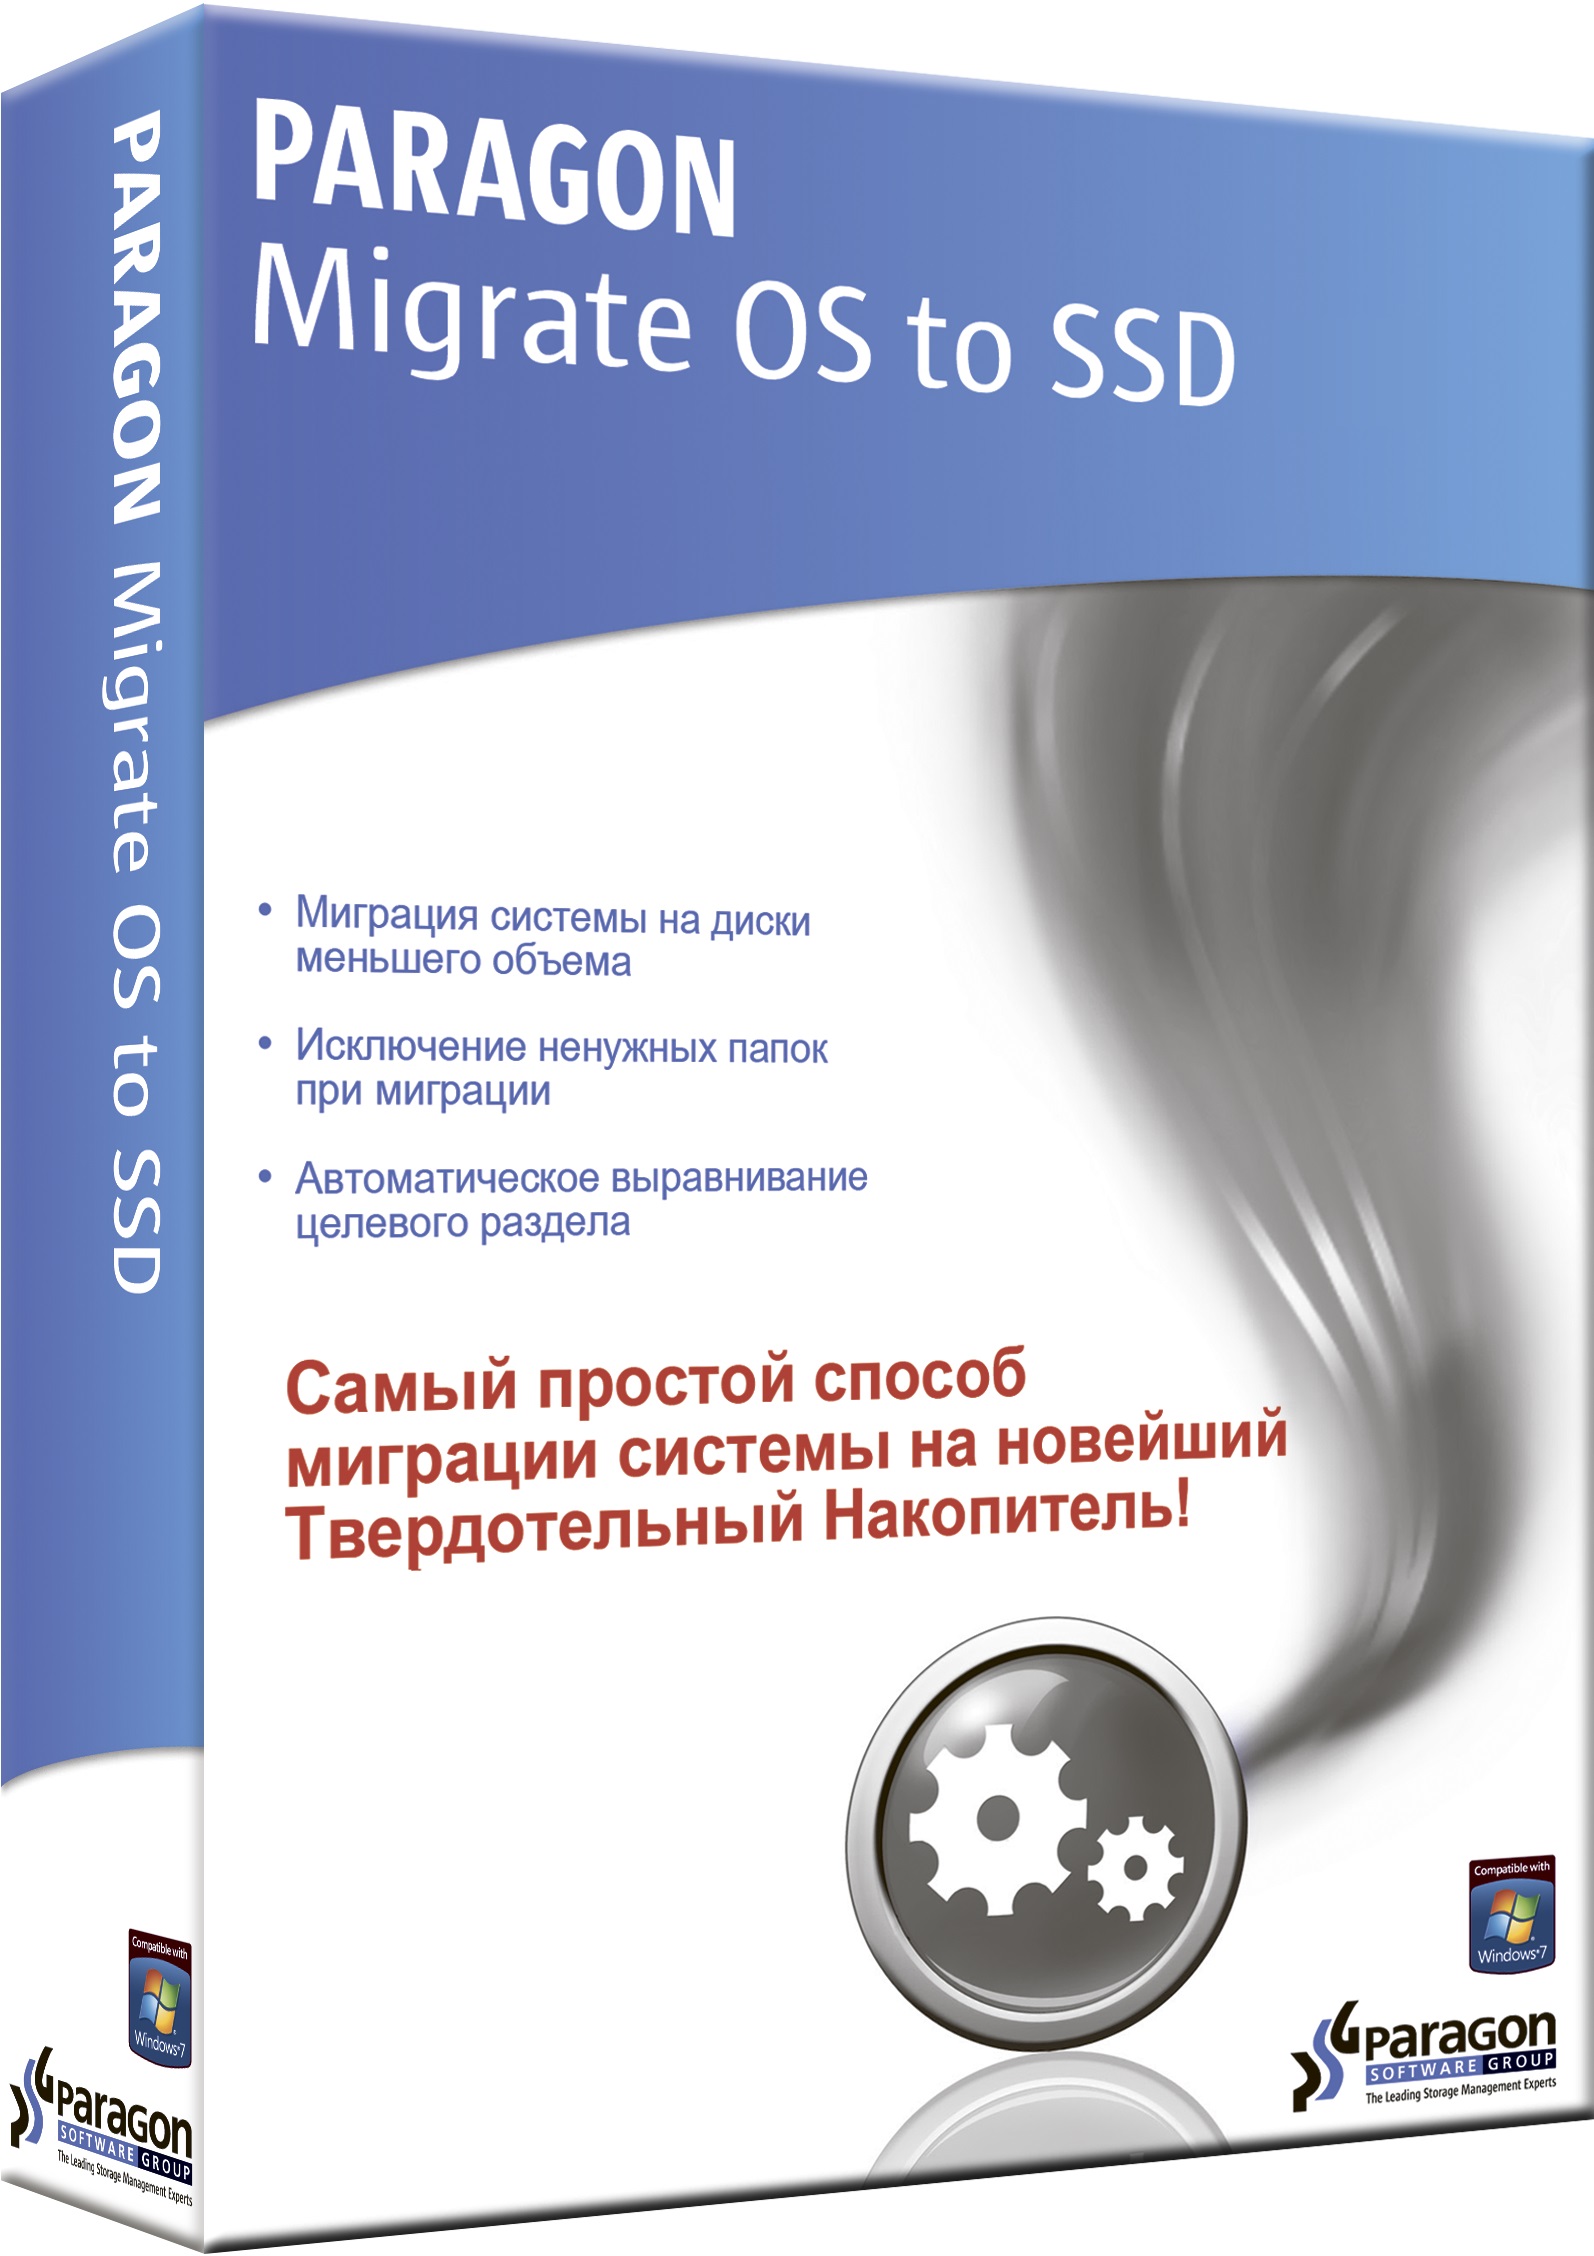 Paragon. Migrate OS to SSD [Цифровая версия] (Цифровая версия)